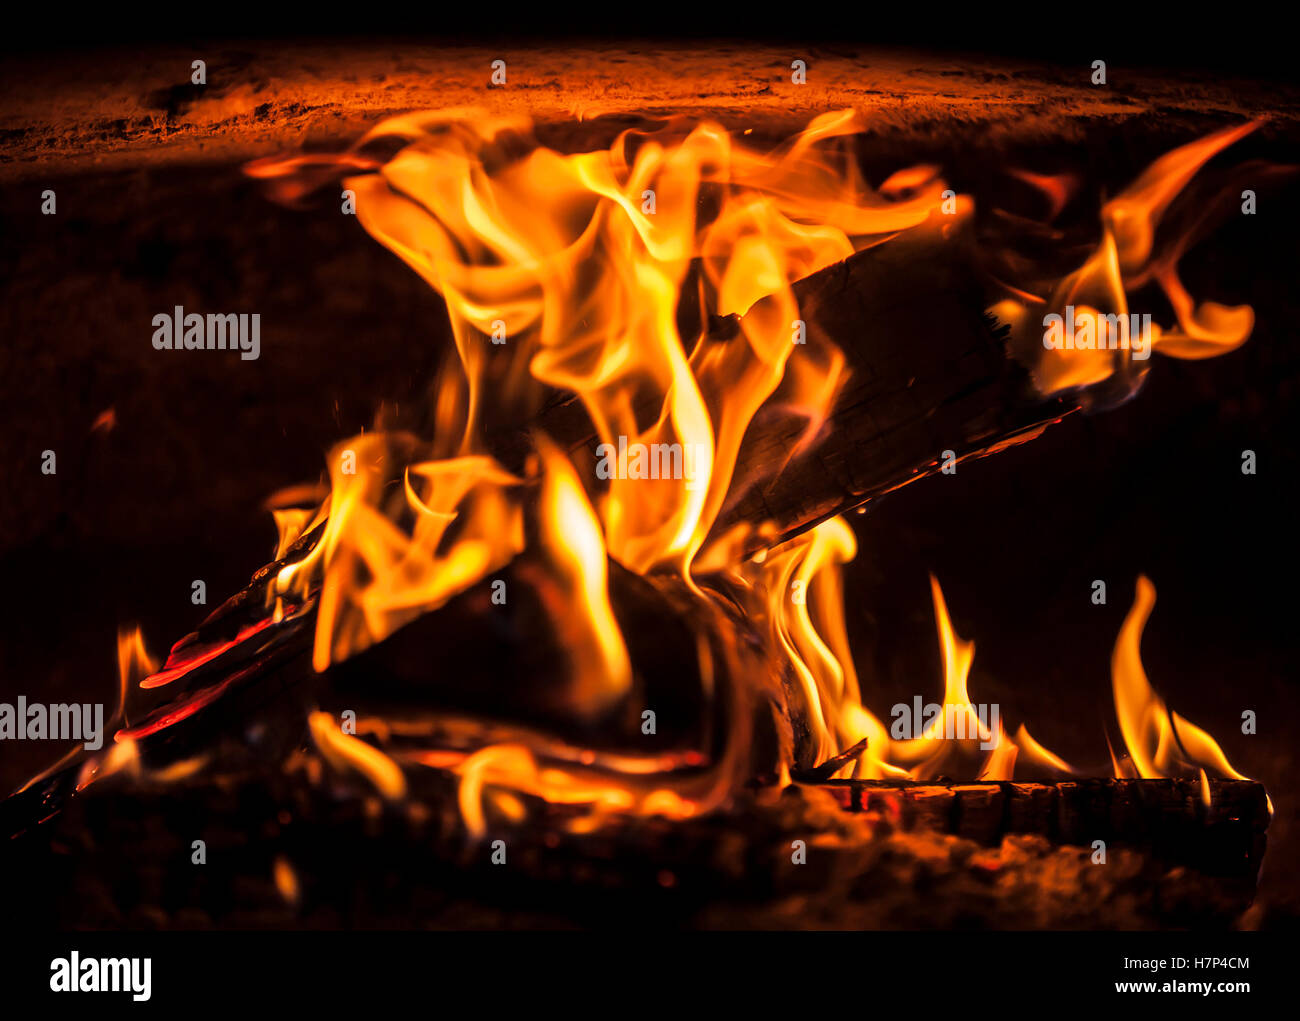 Open fire in the furnace producing heat. Stock Photo